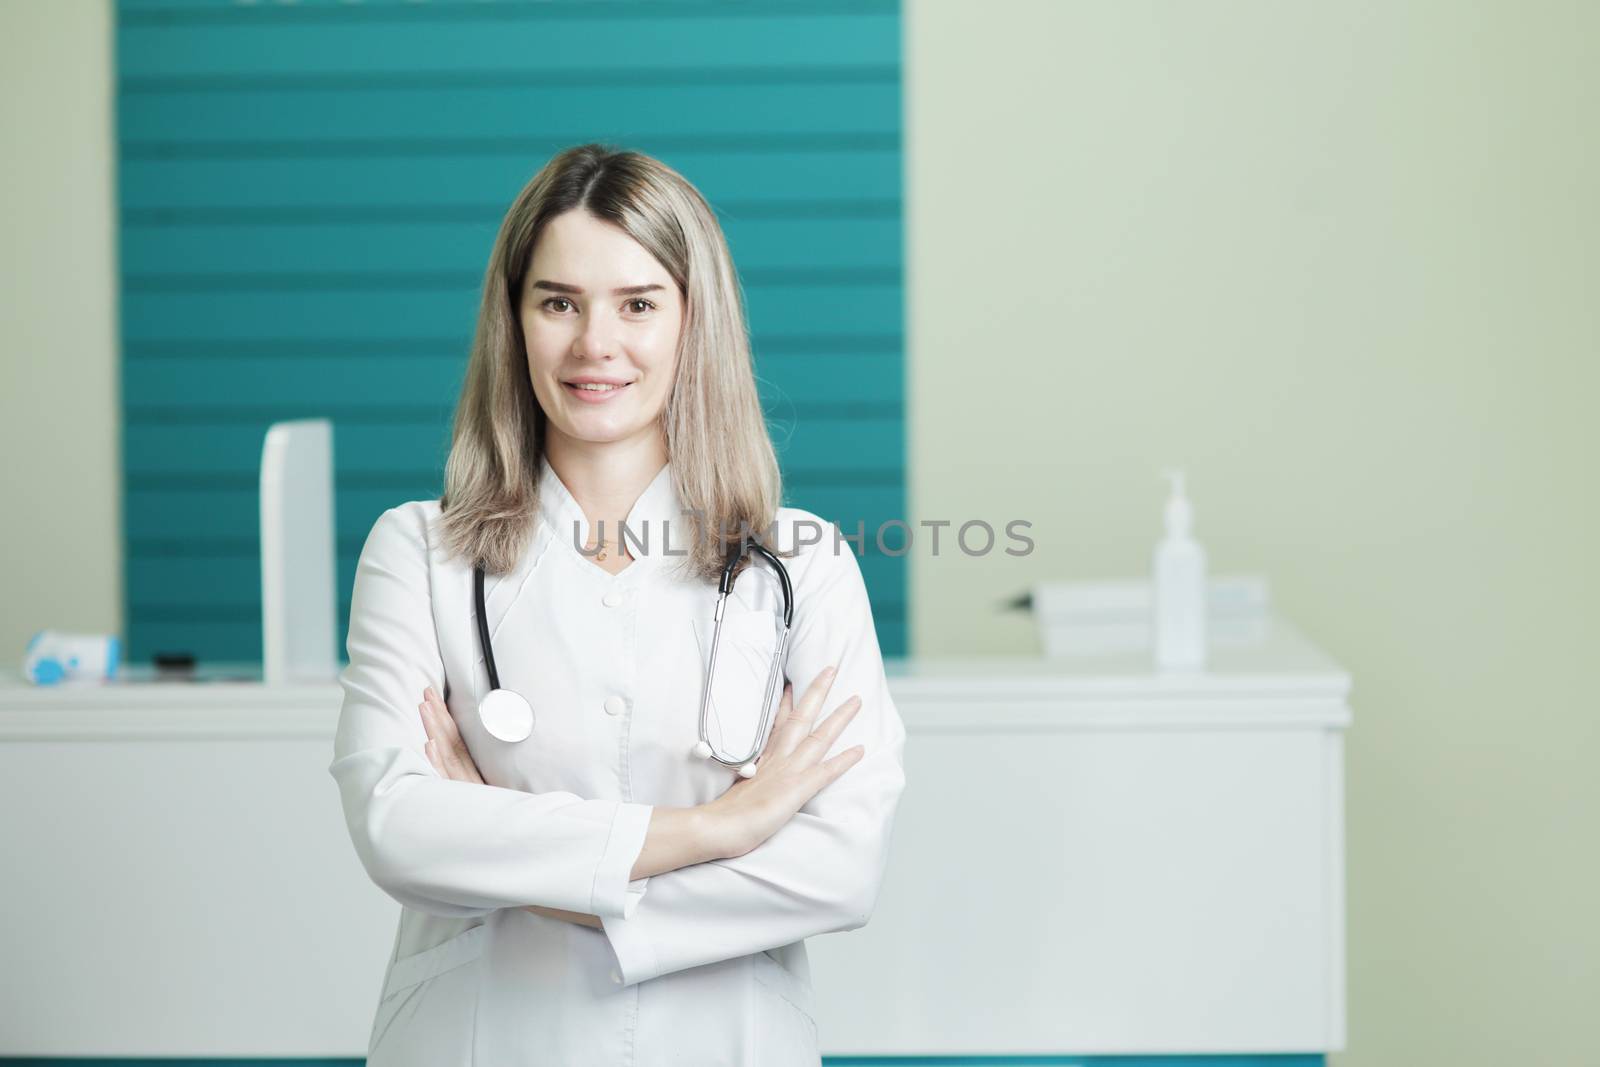 Smiling female doctor or nurse in medical uniform, stethoscope on the neck. In the hospital reception